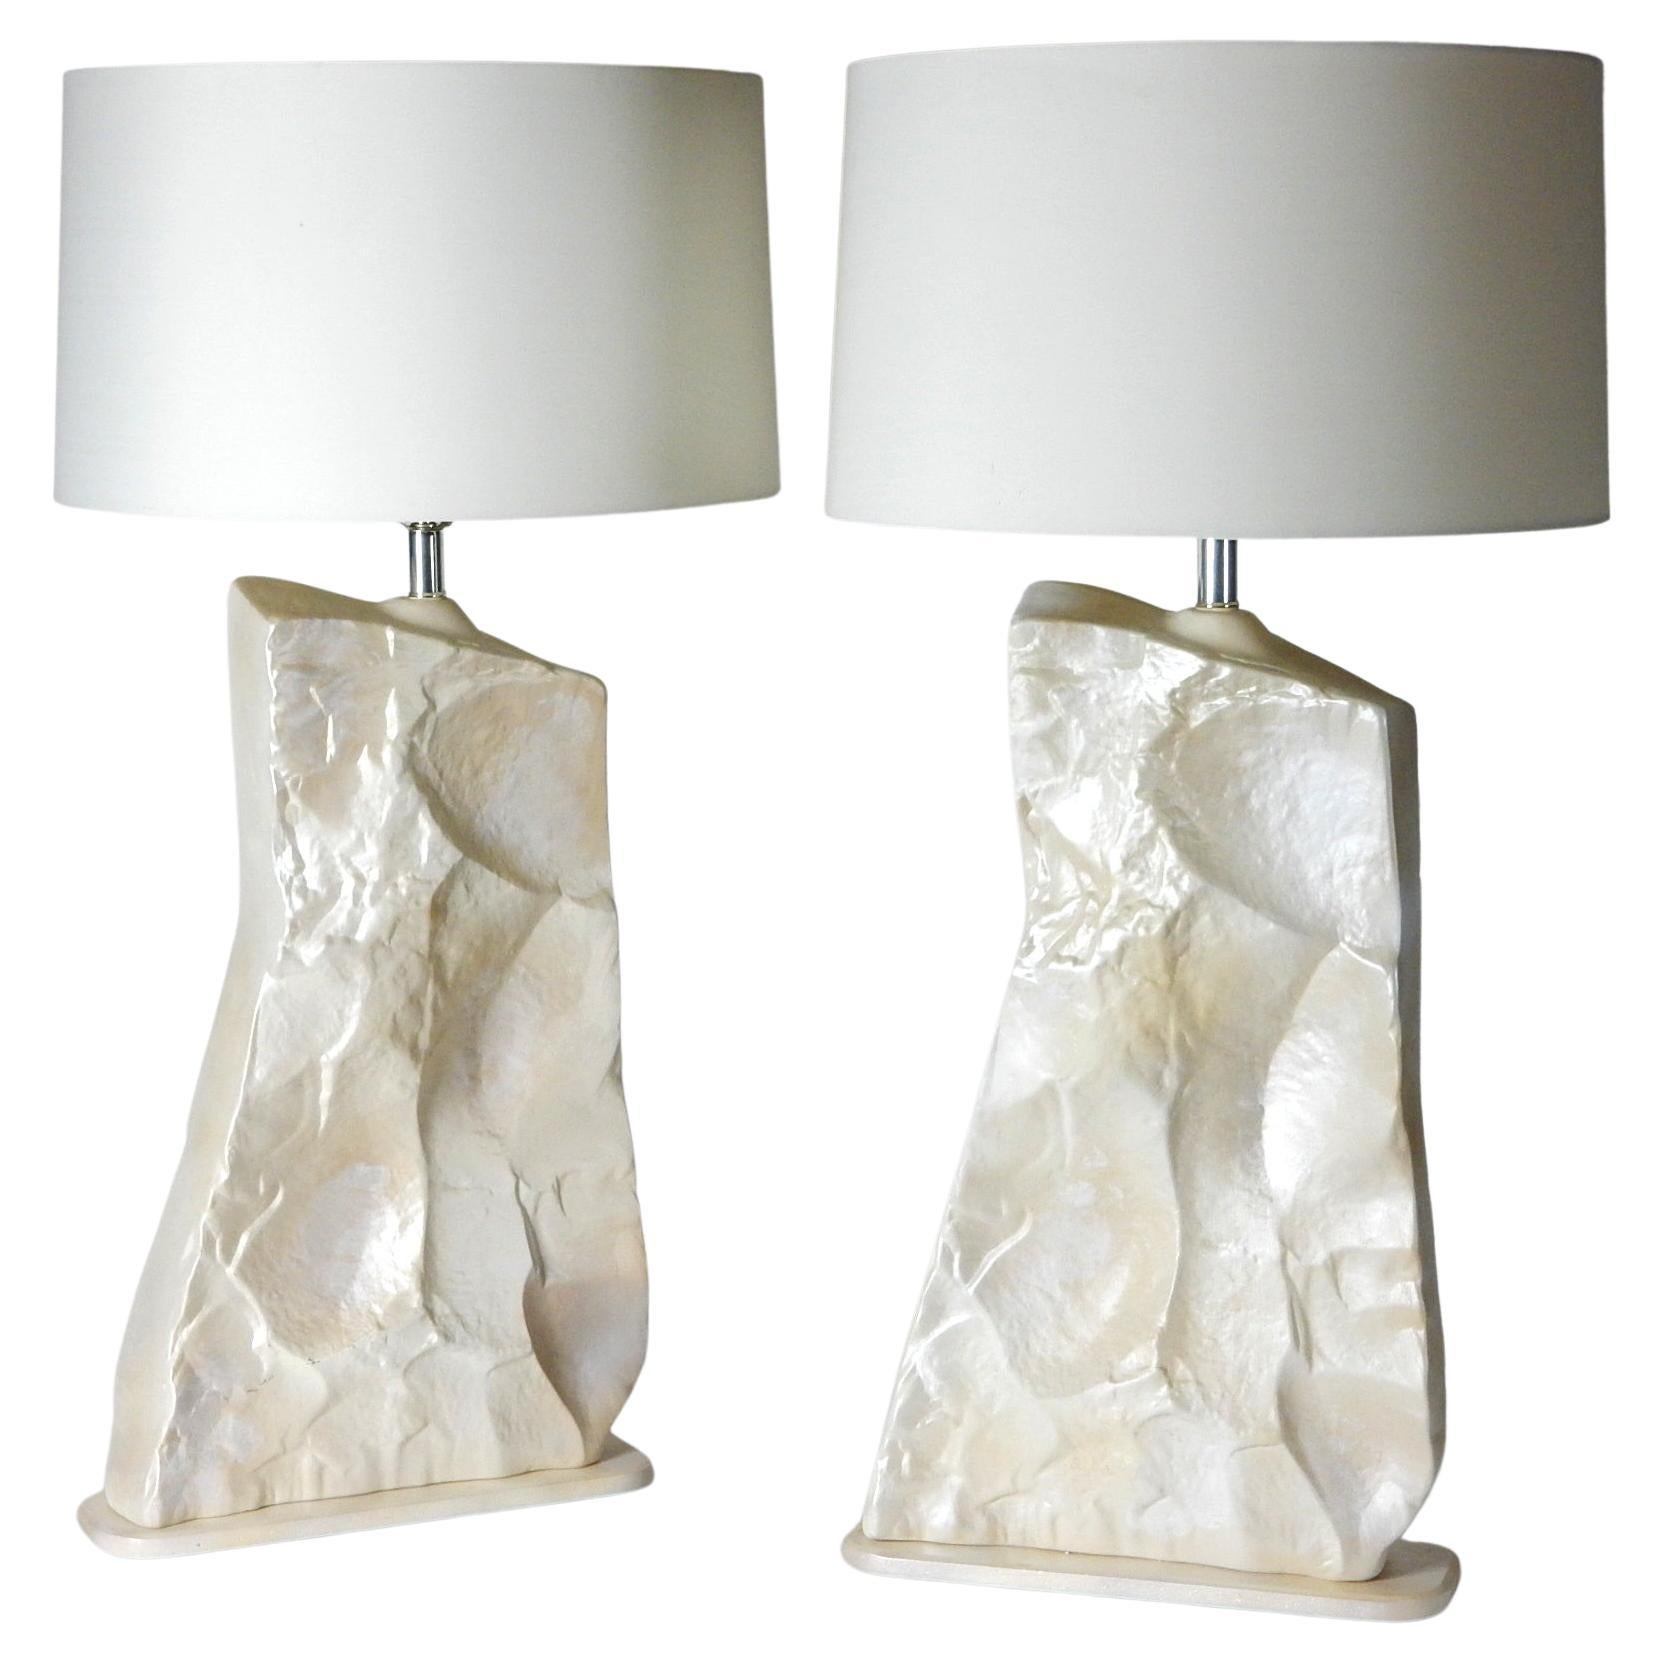 Pair of Faux Slate Stone Table Lamps, 1970's